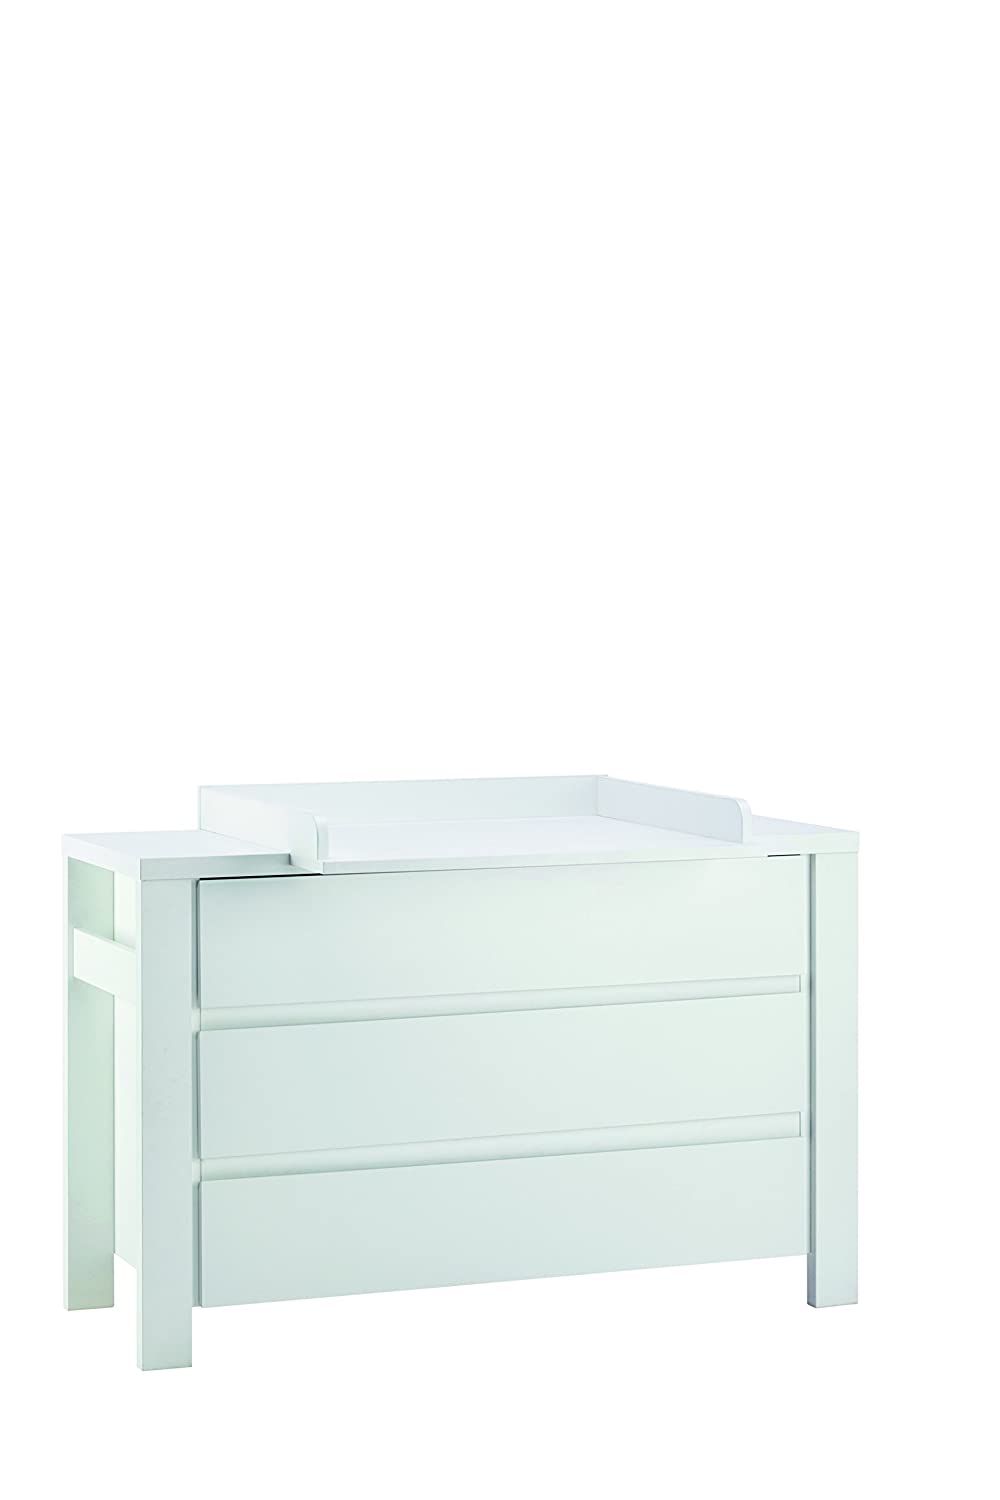 Schardt Milano 05 649 52 02 Extra Wide Changing Table, White